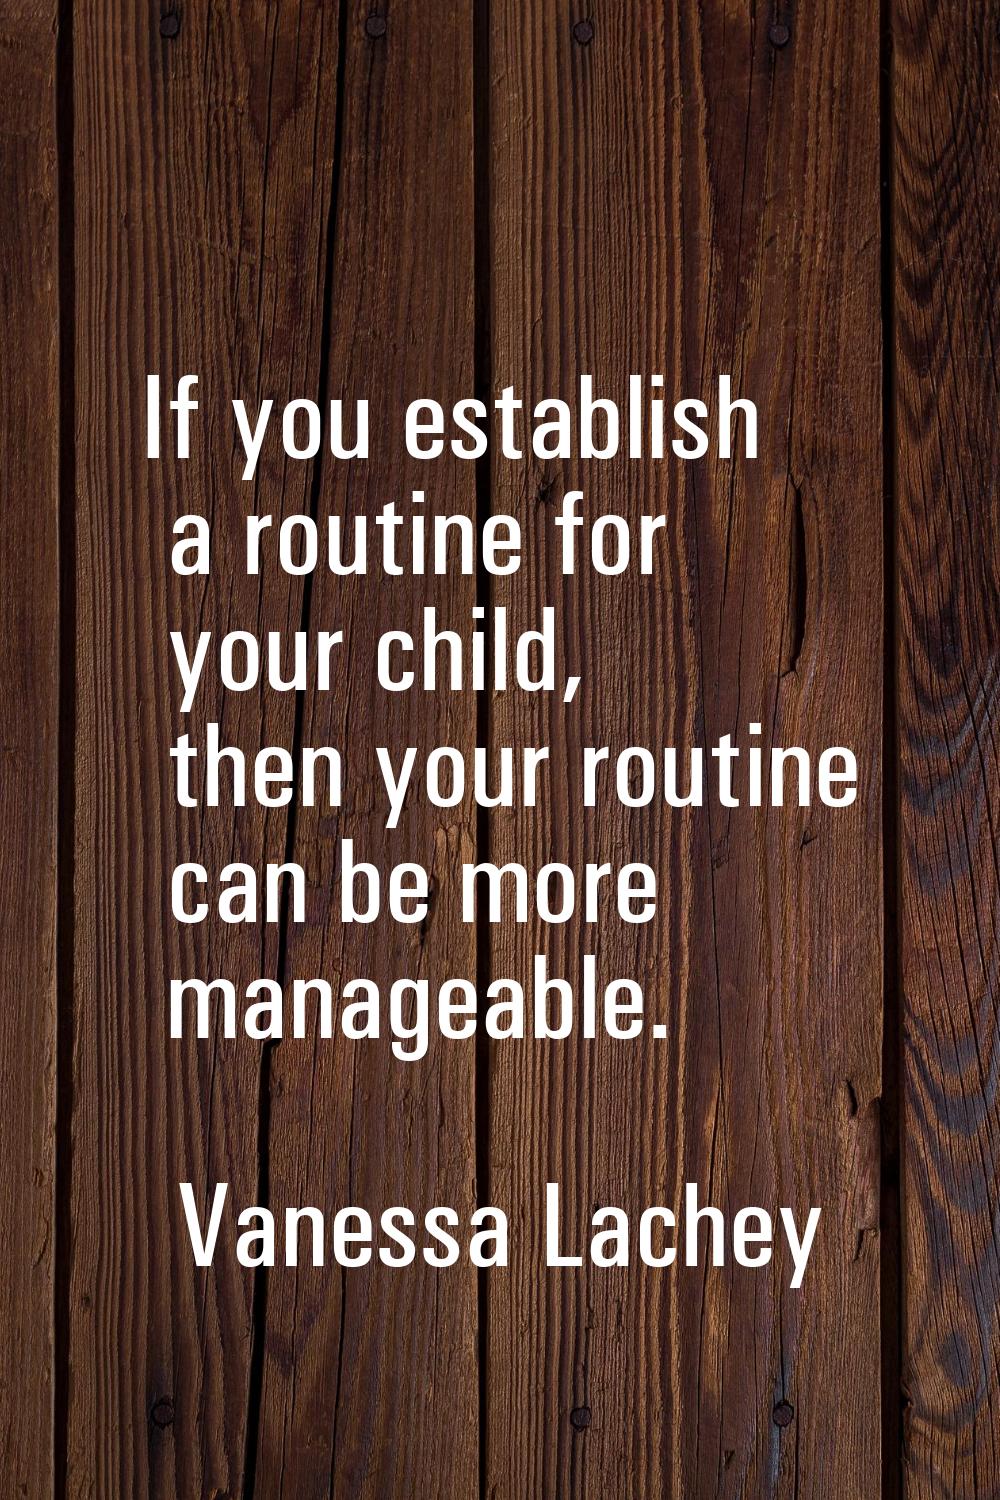 If you establish a routine for your child, then your routine can be more manageable.